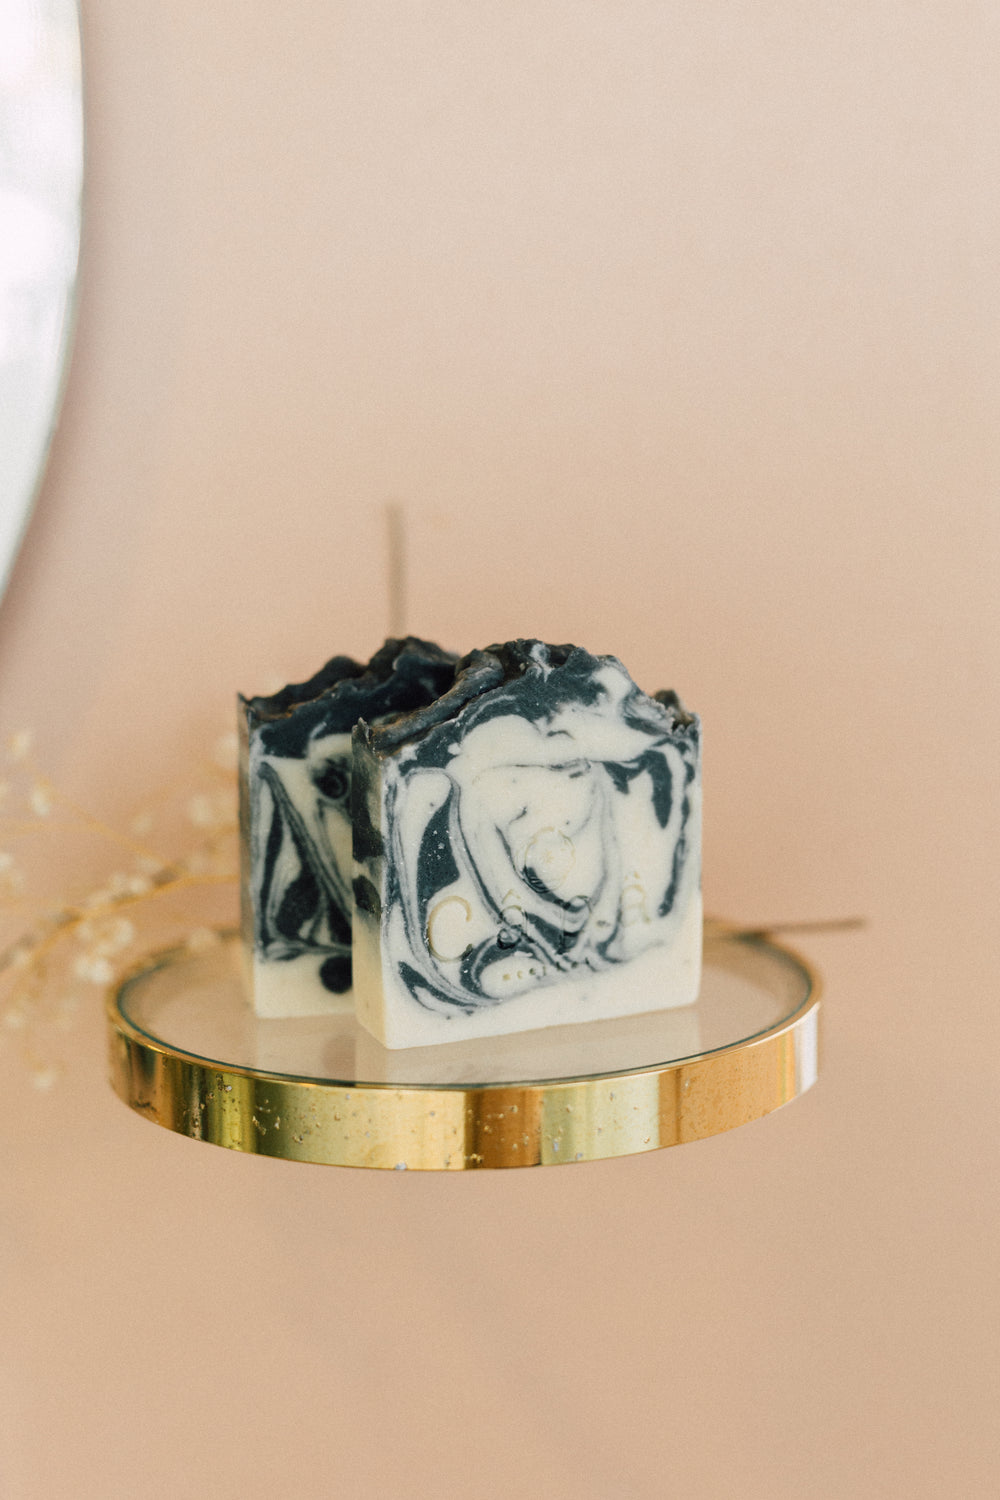 Activated Charcoal and Rosemary Soap